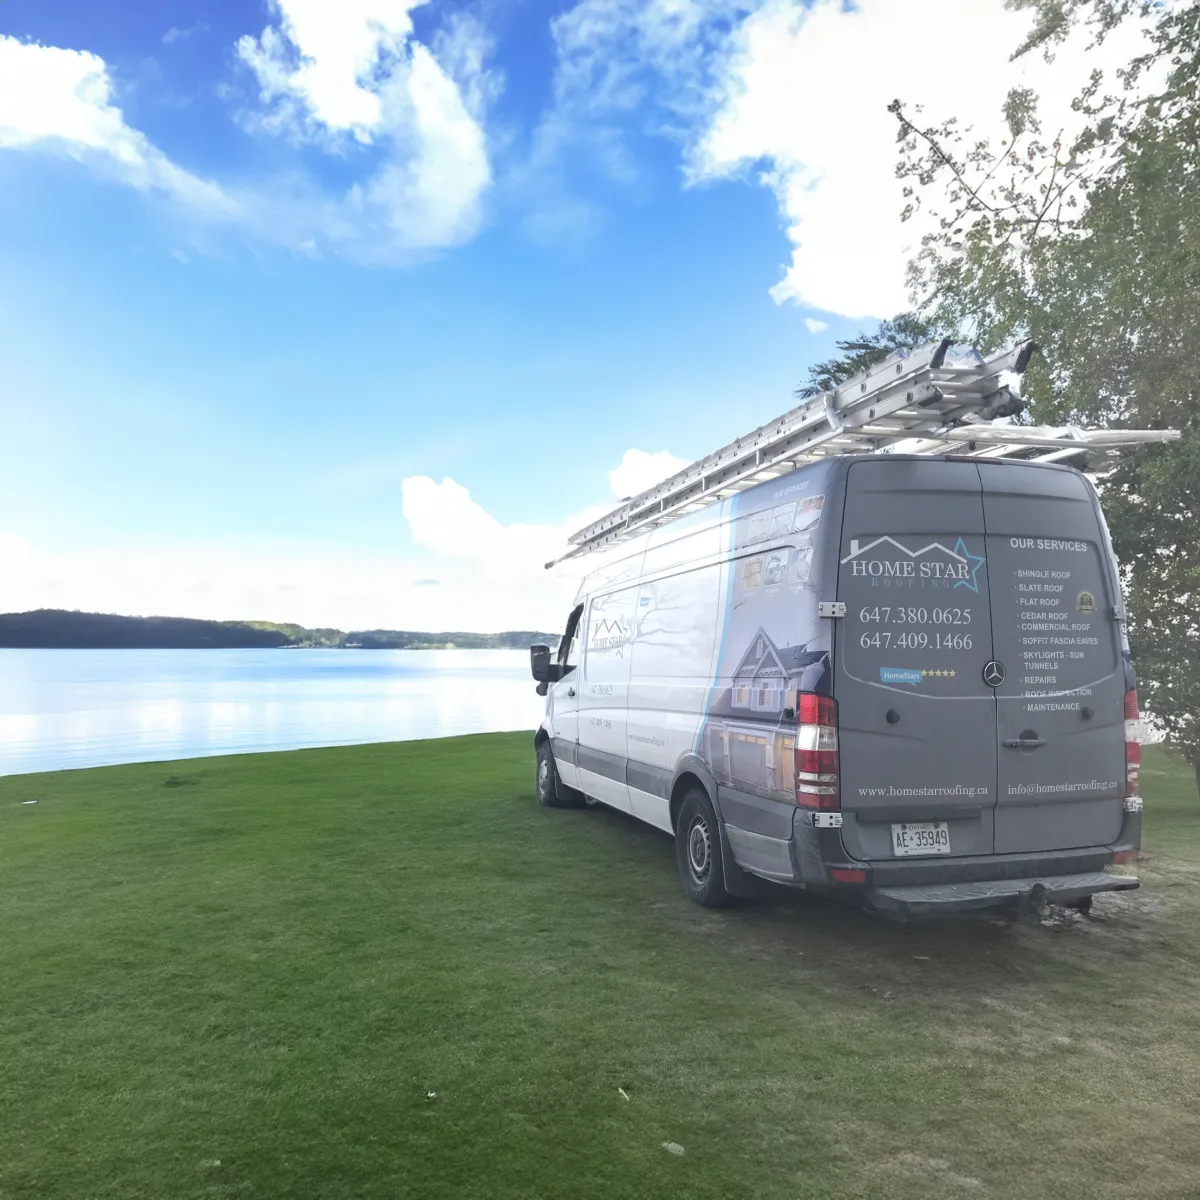 Home Star Roofing van parked on a serene lakeside property, showcasing the company's readiness to provide roofing services in beautiful locations